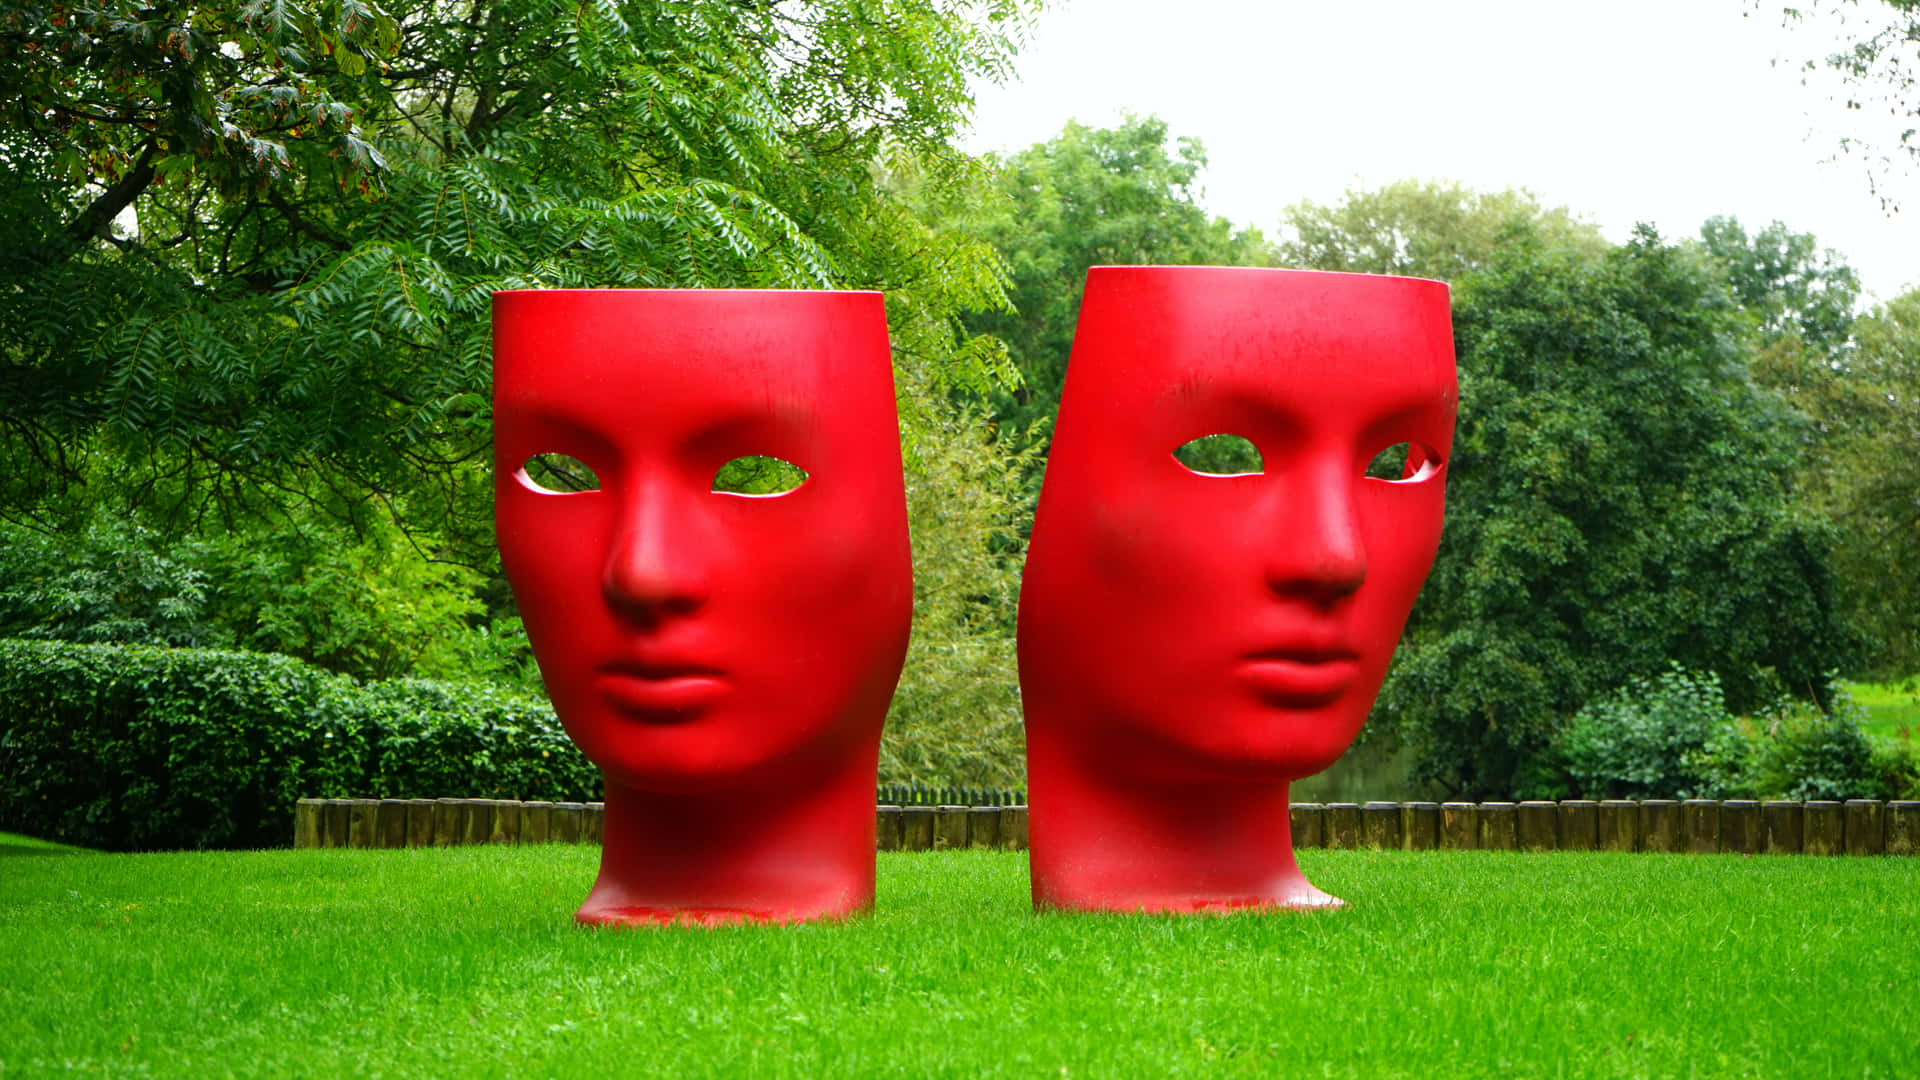 Two Red Sculptures In The Grass Background